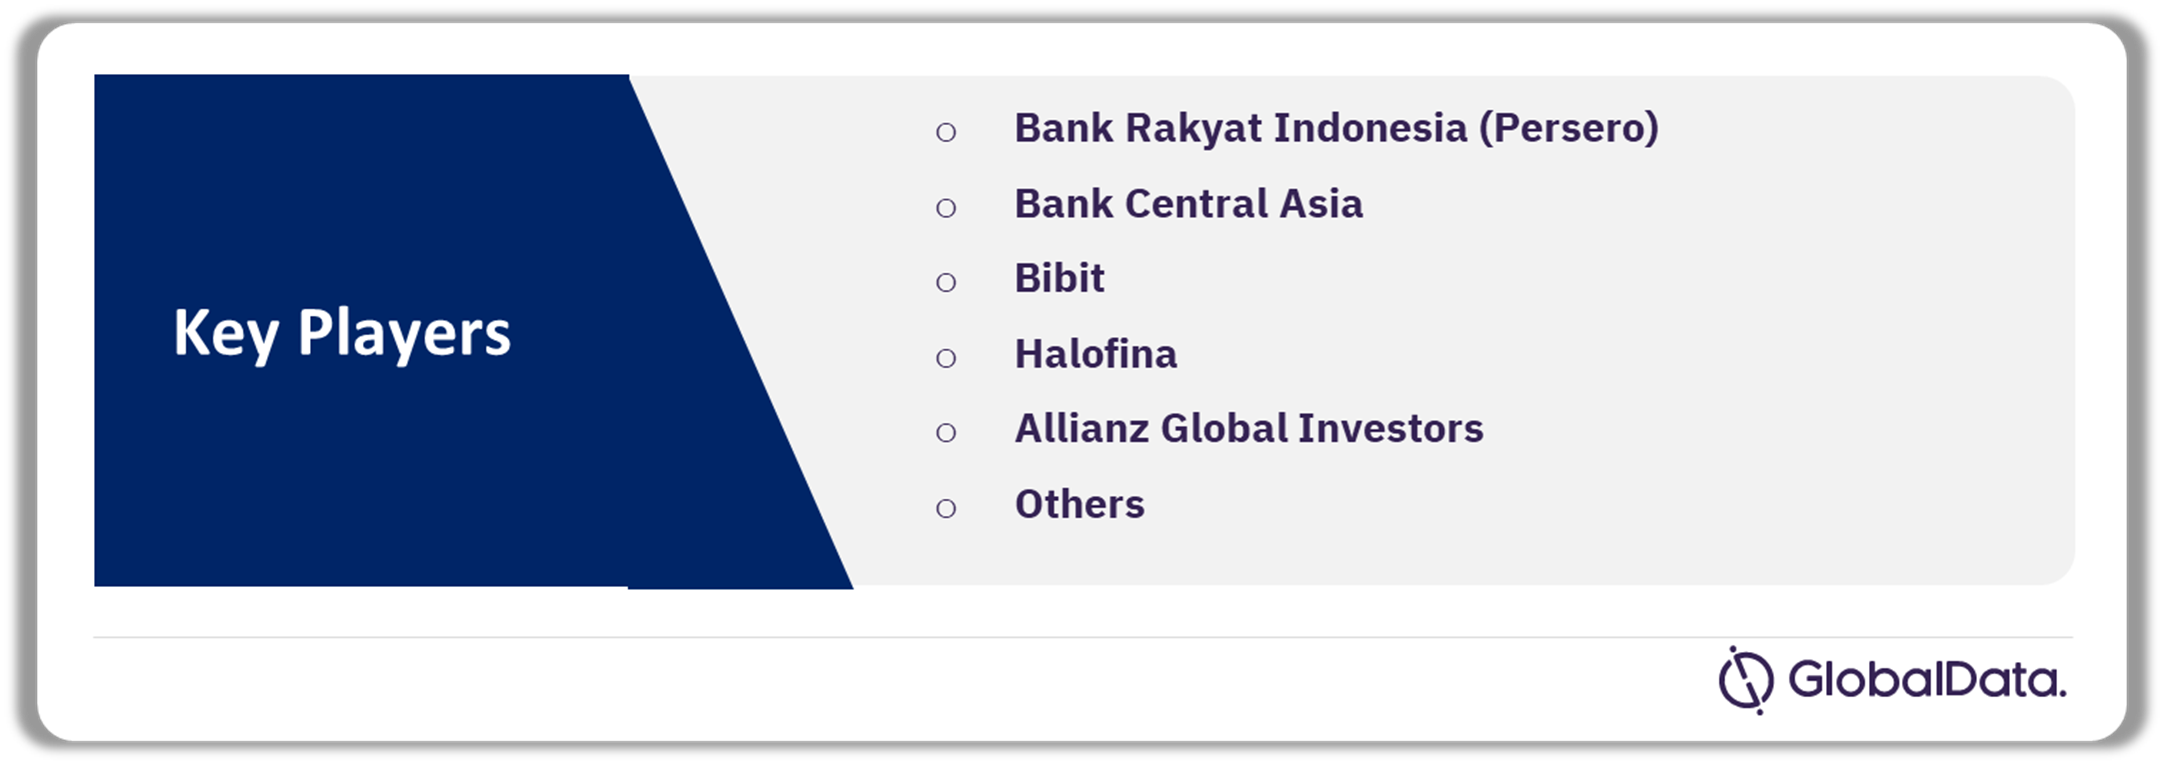 Indonesia Wealth Management Market Players